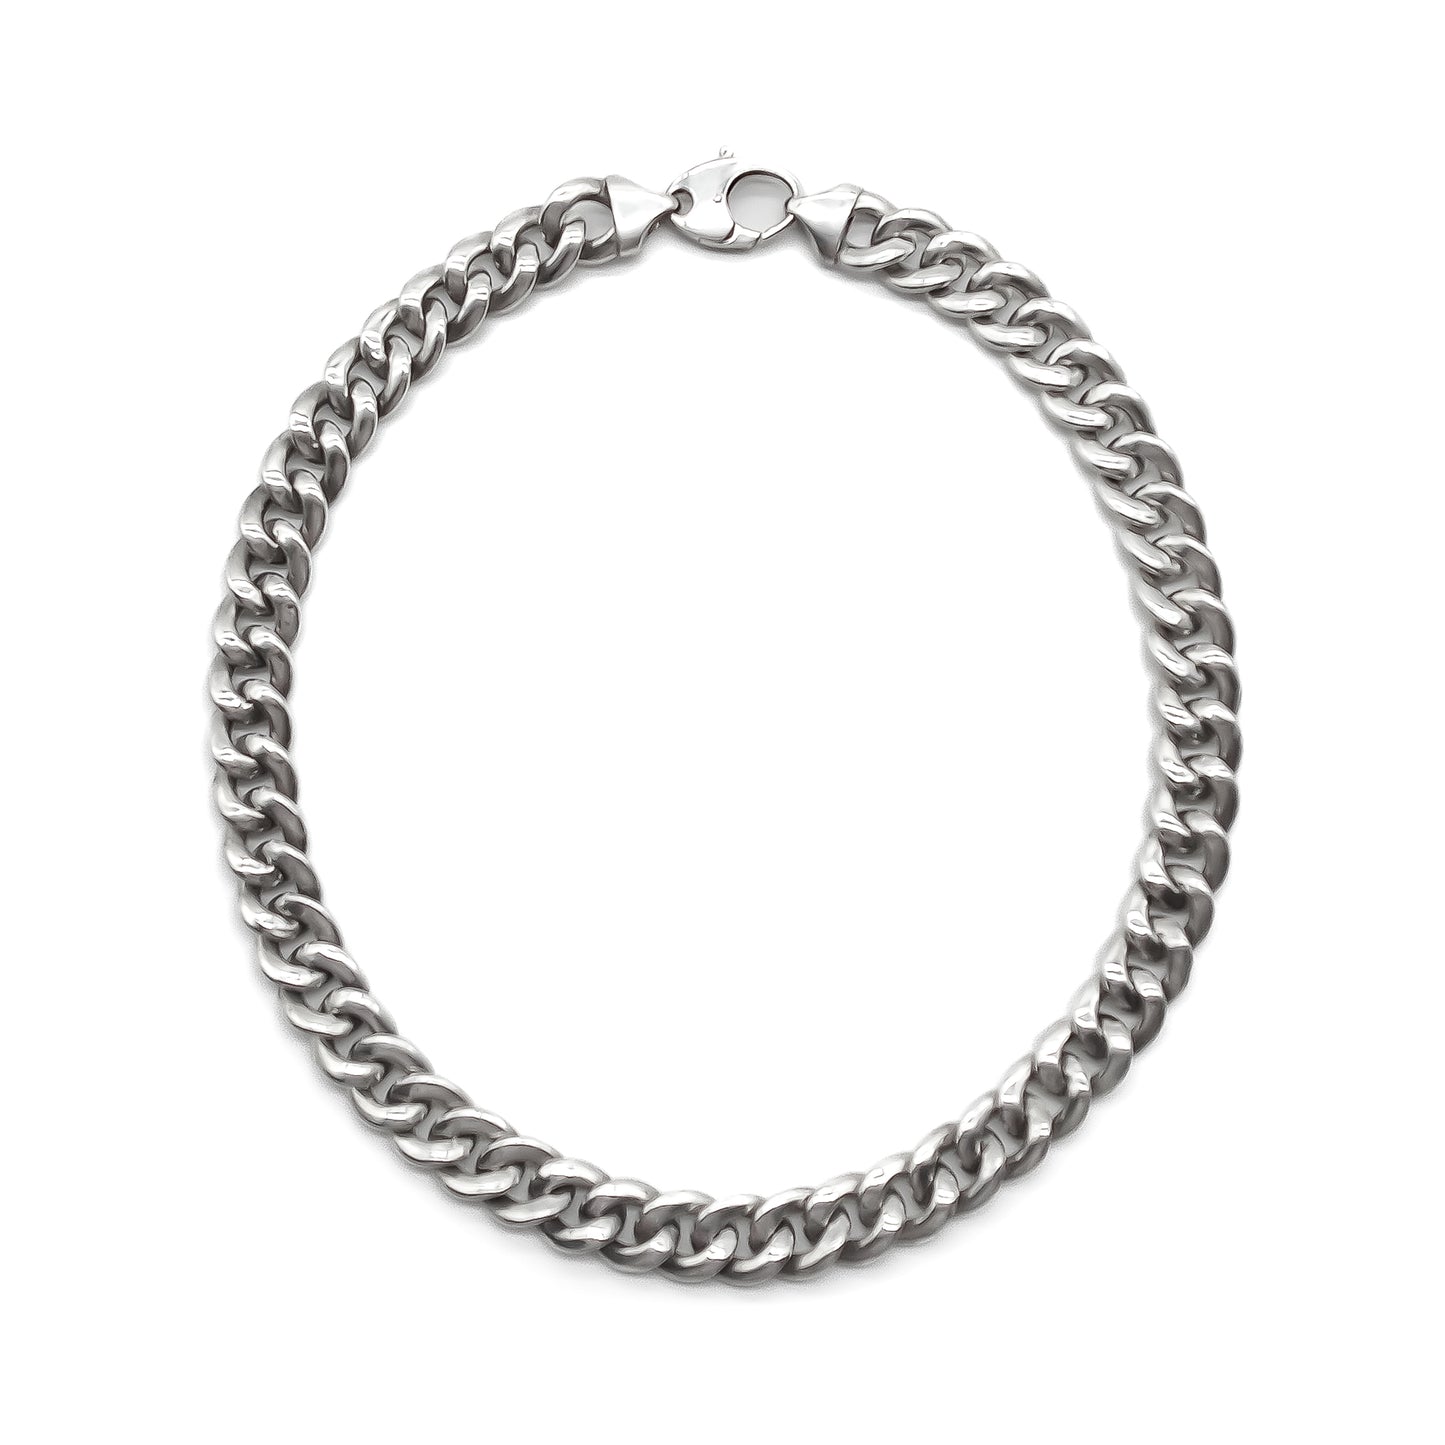 Chunky sterling silver belcher link chain with a lobster clasp.